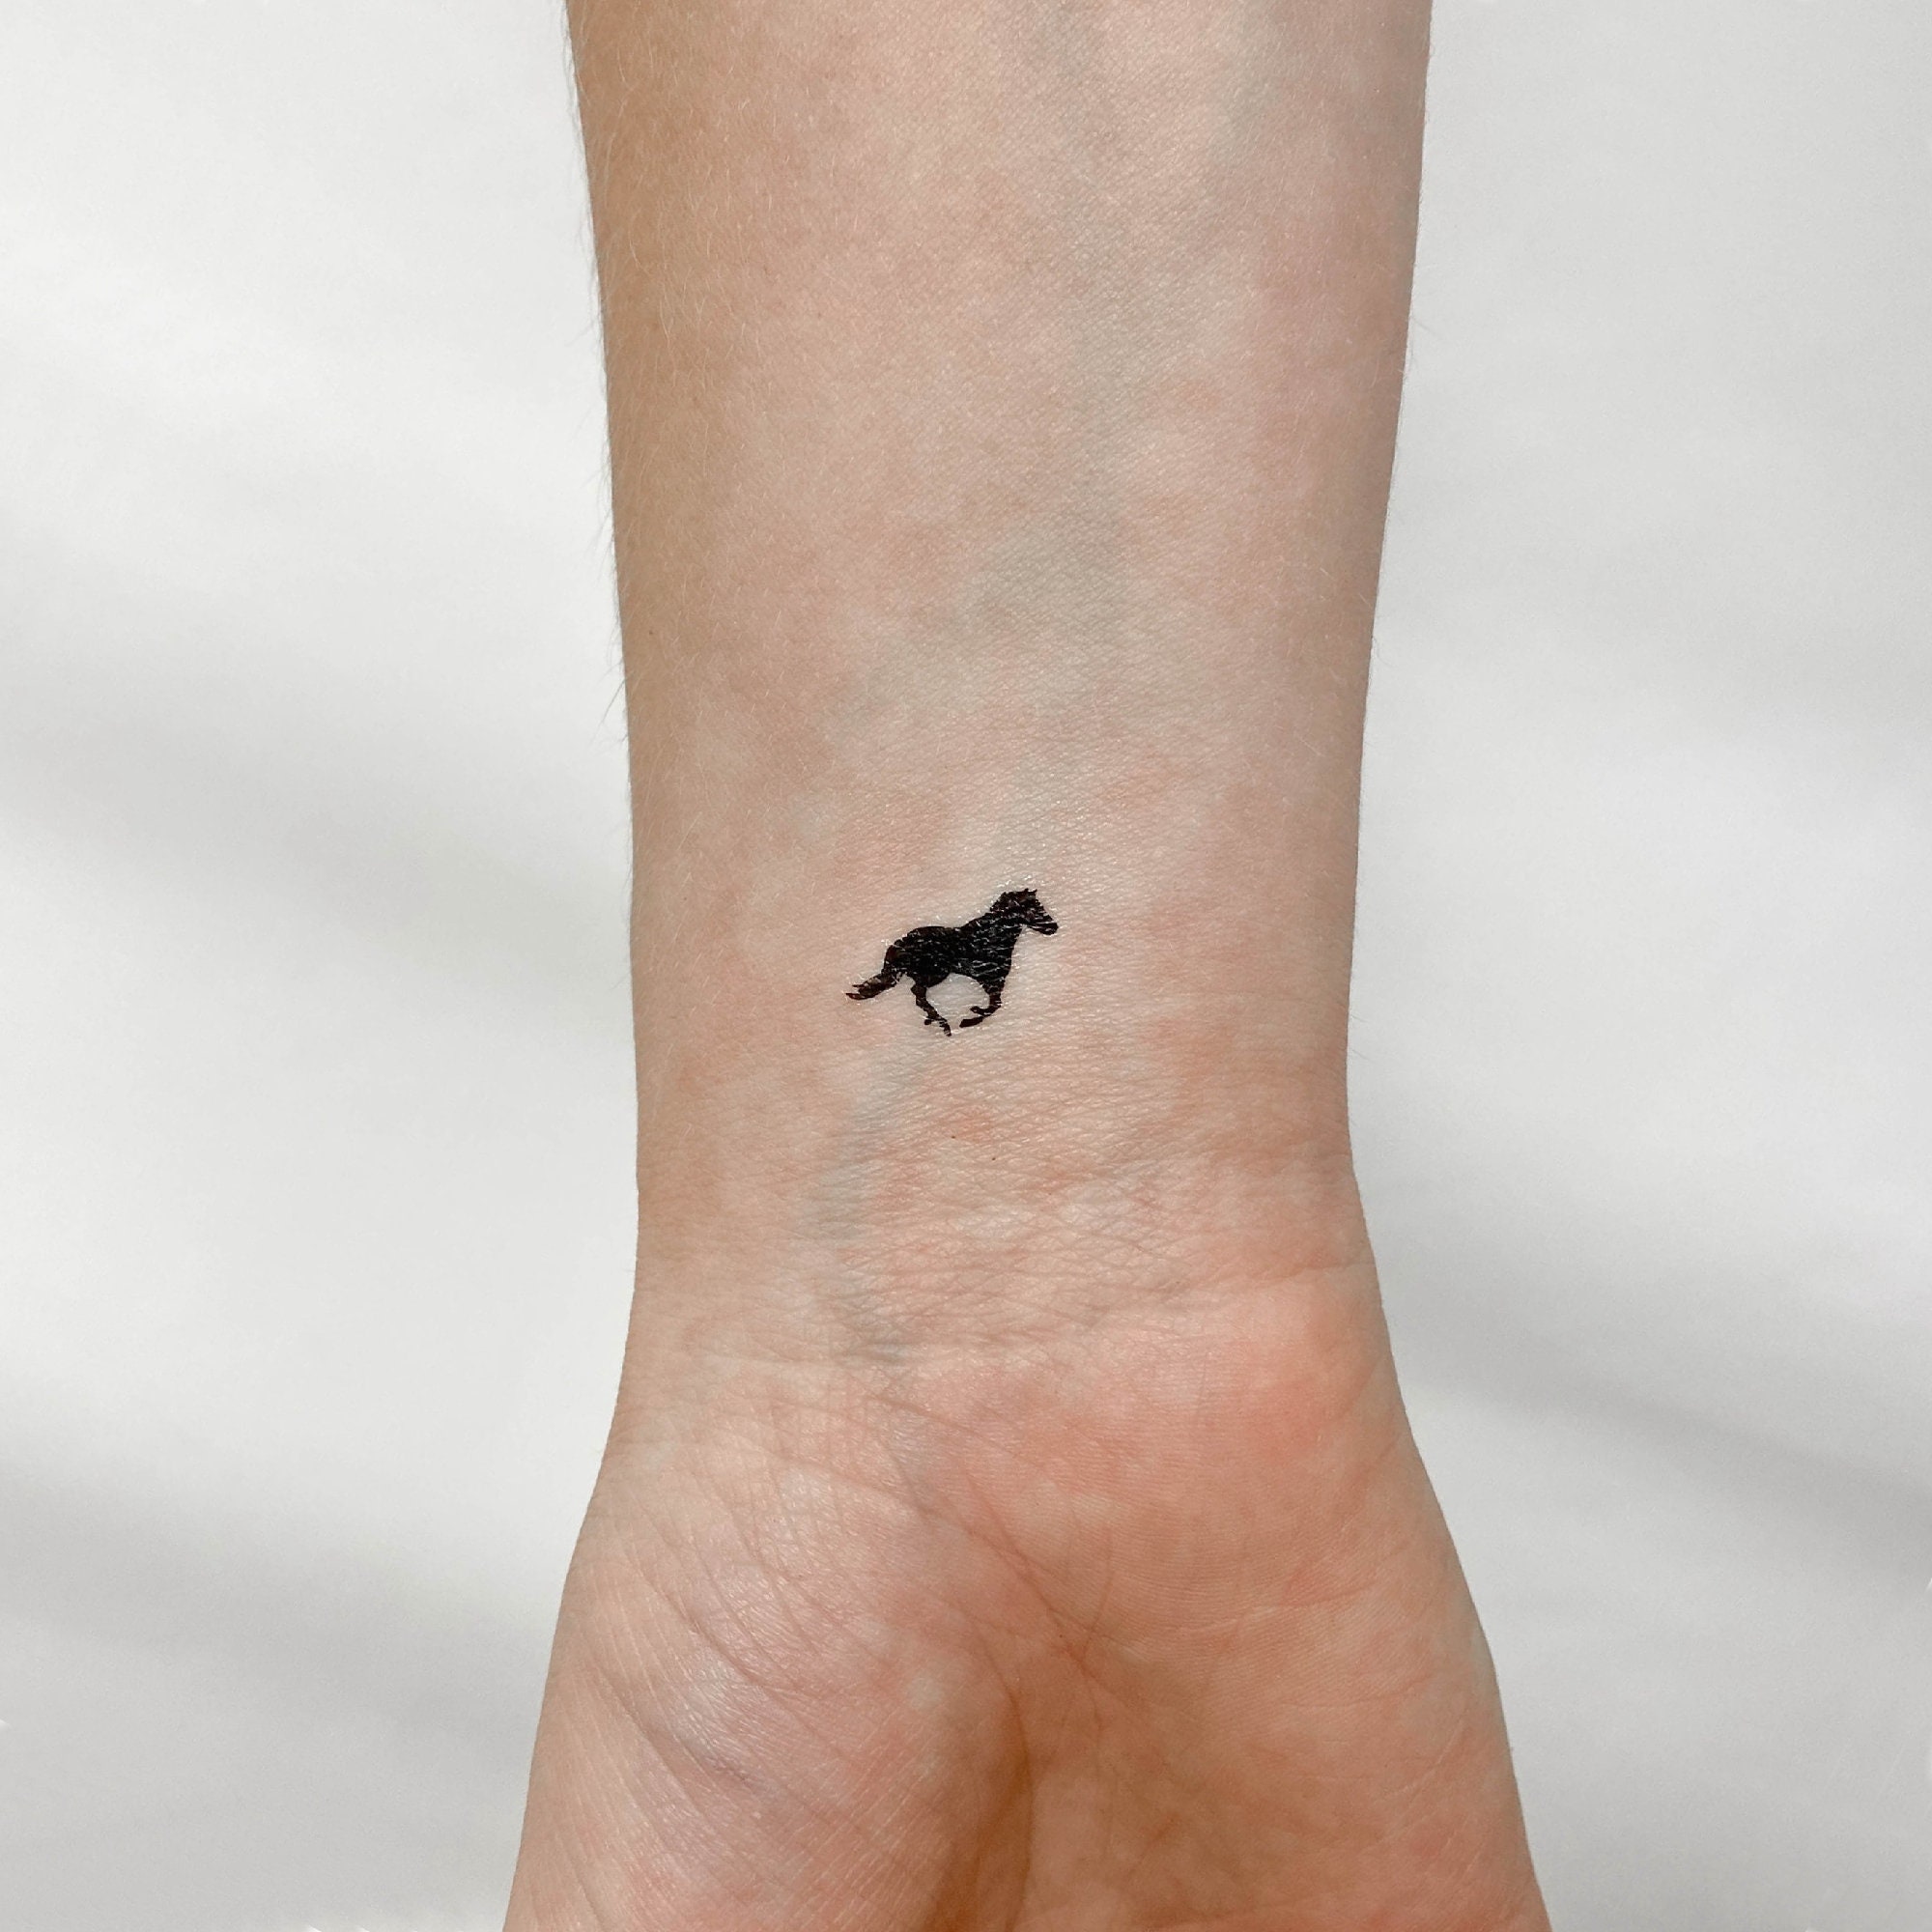 140 Horse tattoos: Design, Ideas and Styles | Art and Design